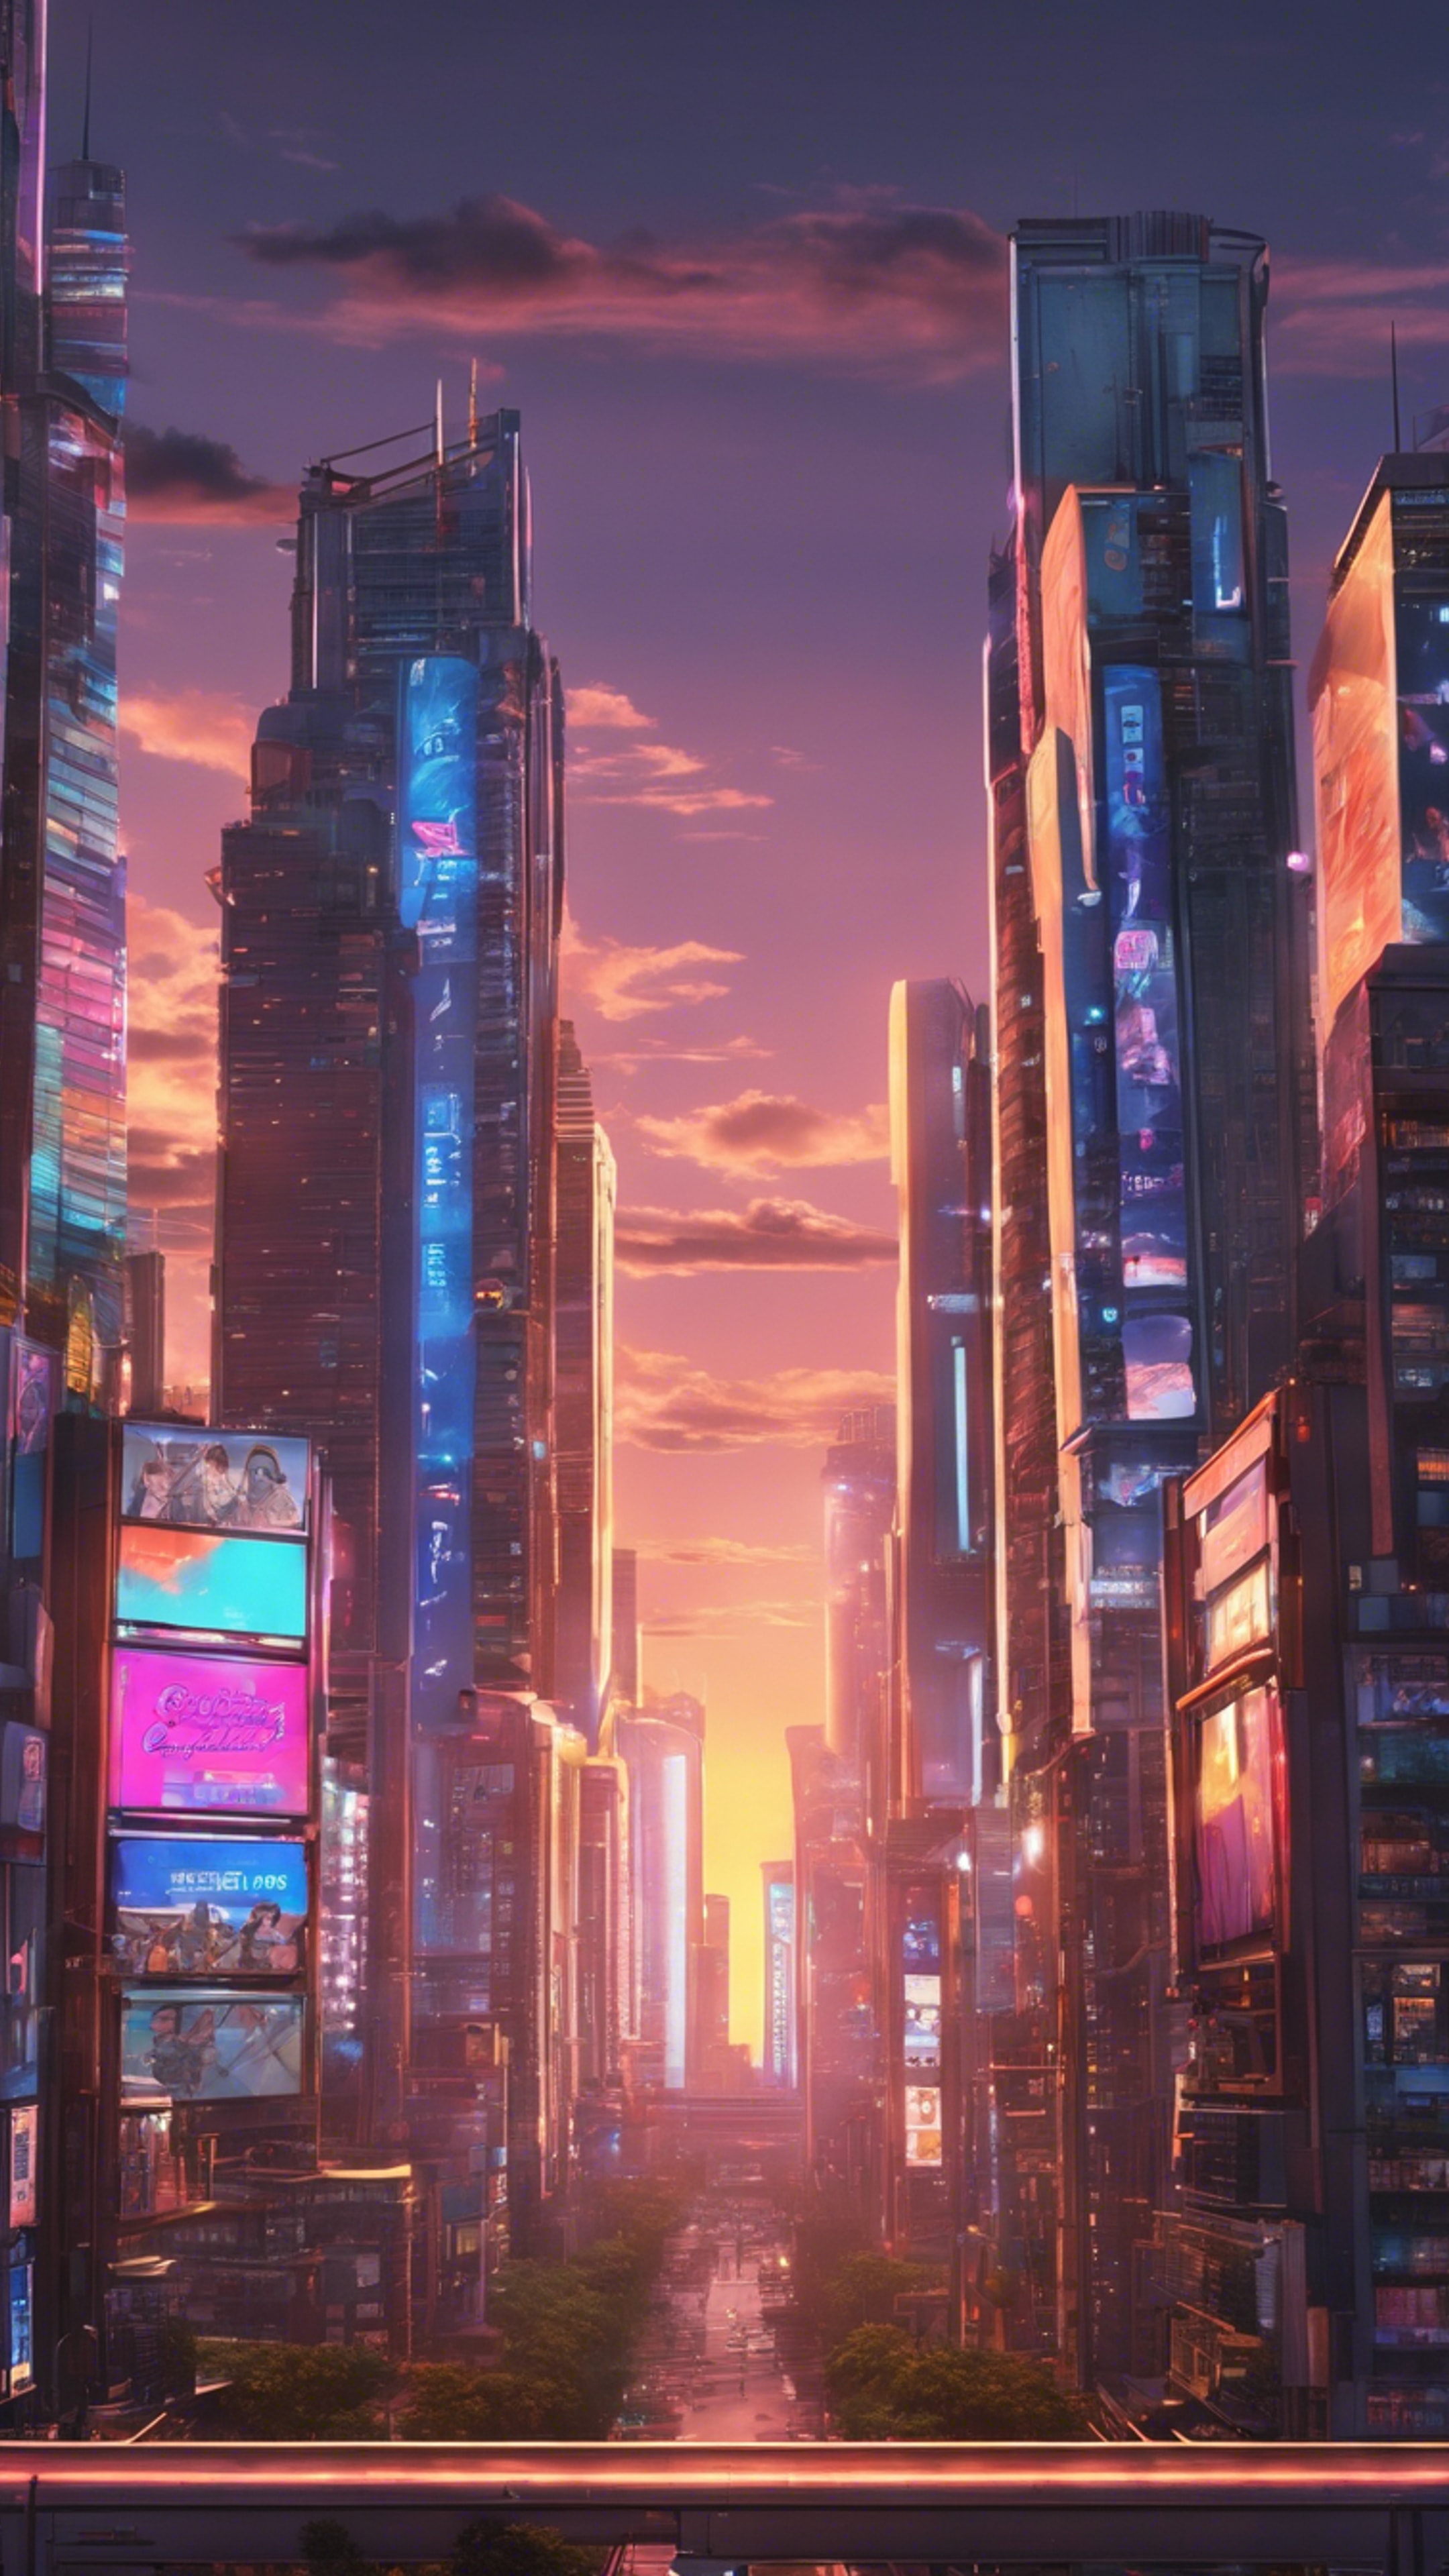 A cool anime-themed cityscape at sunset with towering skyscrapers and glowing neon billboards. Tapéta[63ed83801d984cce89ed]